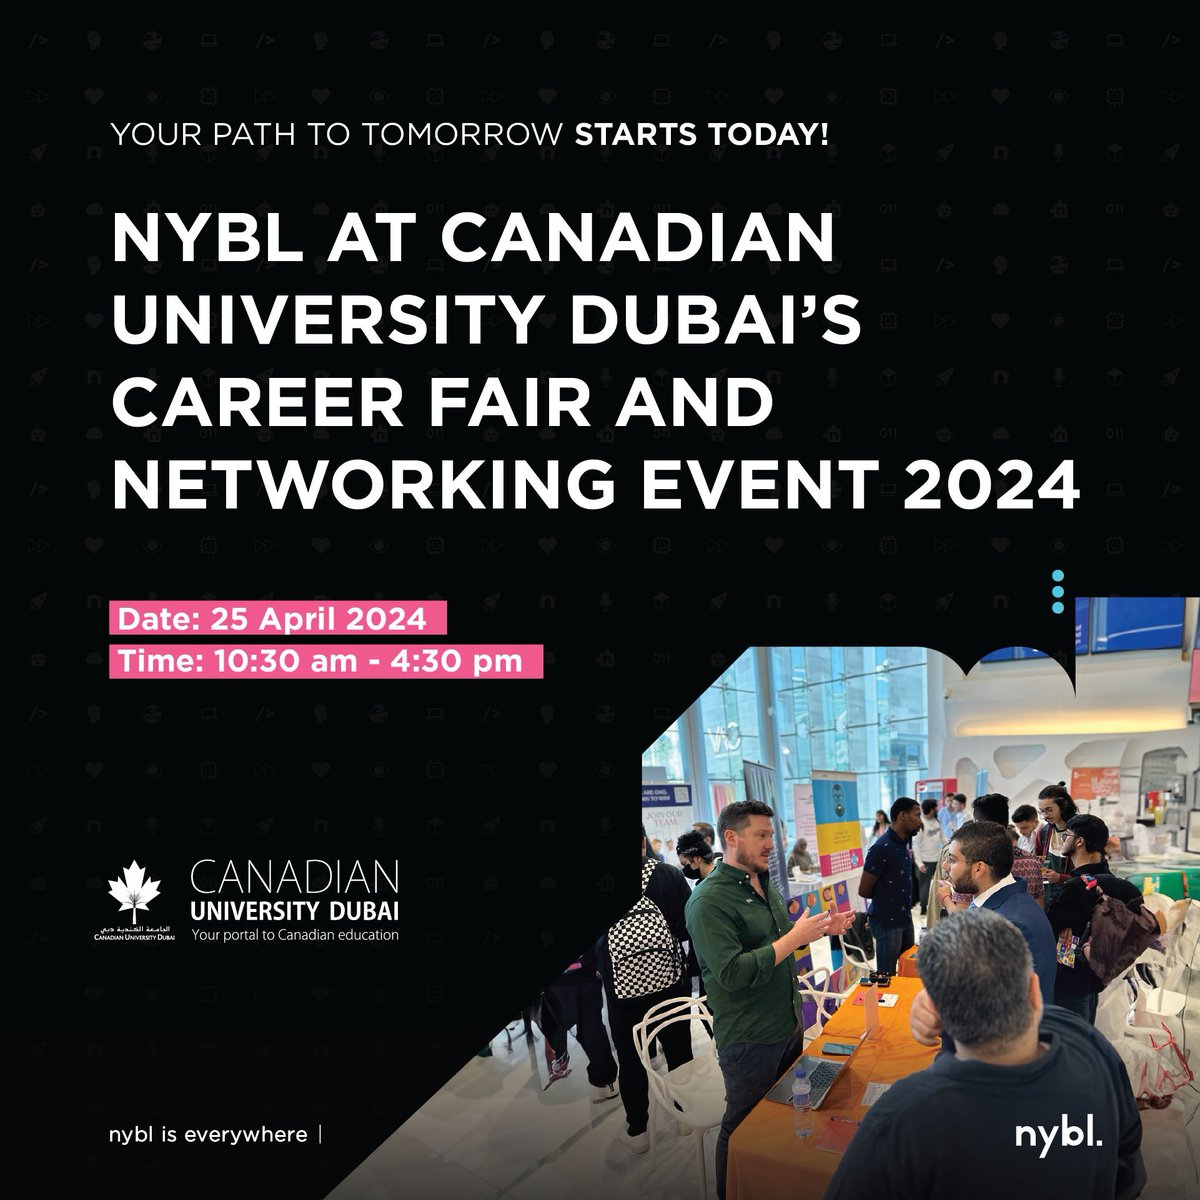 Get ready to meet team nybl at Canadian University Dubai's Career Fair & Networking Event 2024! 💜 Let's connect for everything AI, progressive work culture, opportunities, and fun! Click to learn more: buff.ly/49Z1cLe #nybl_is_knowledge #nybl_is_everywhere #AI #Jobs